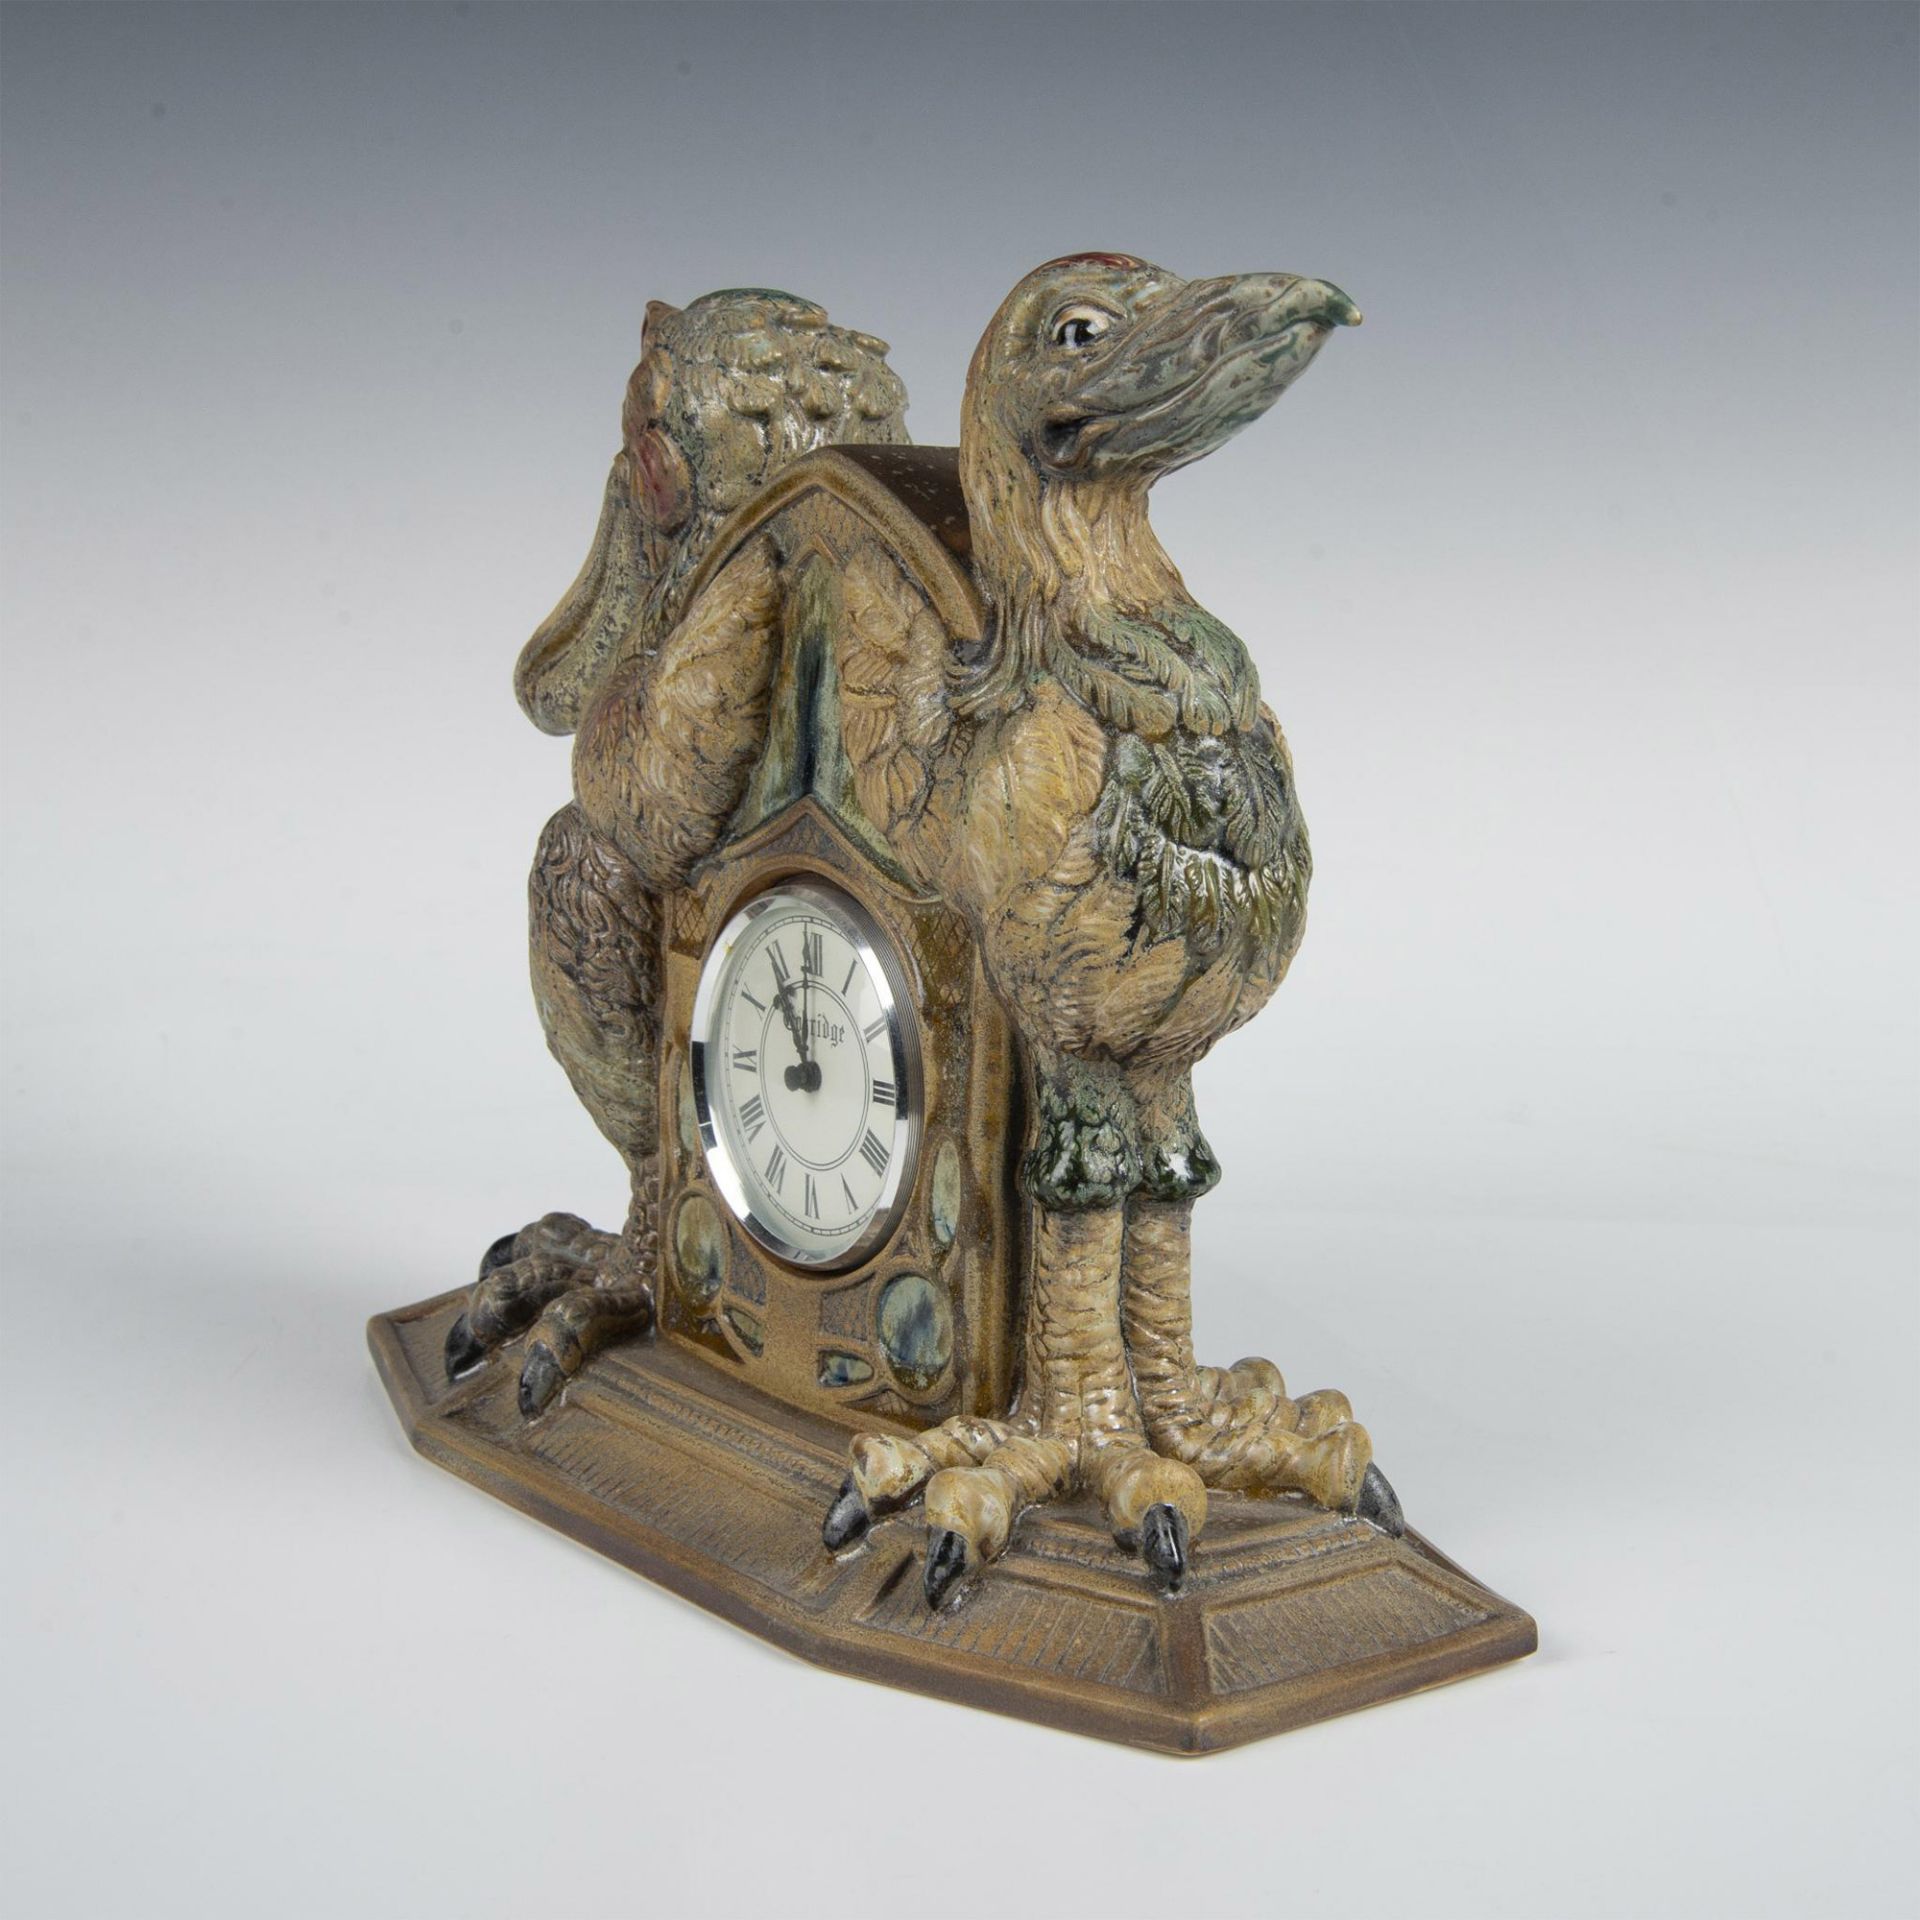 Andrew Hull for Cobridge Stoneware Clock, Caught in Time - Image 5 of 7